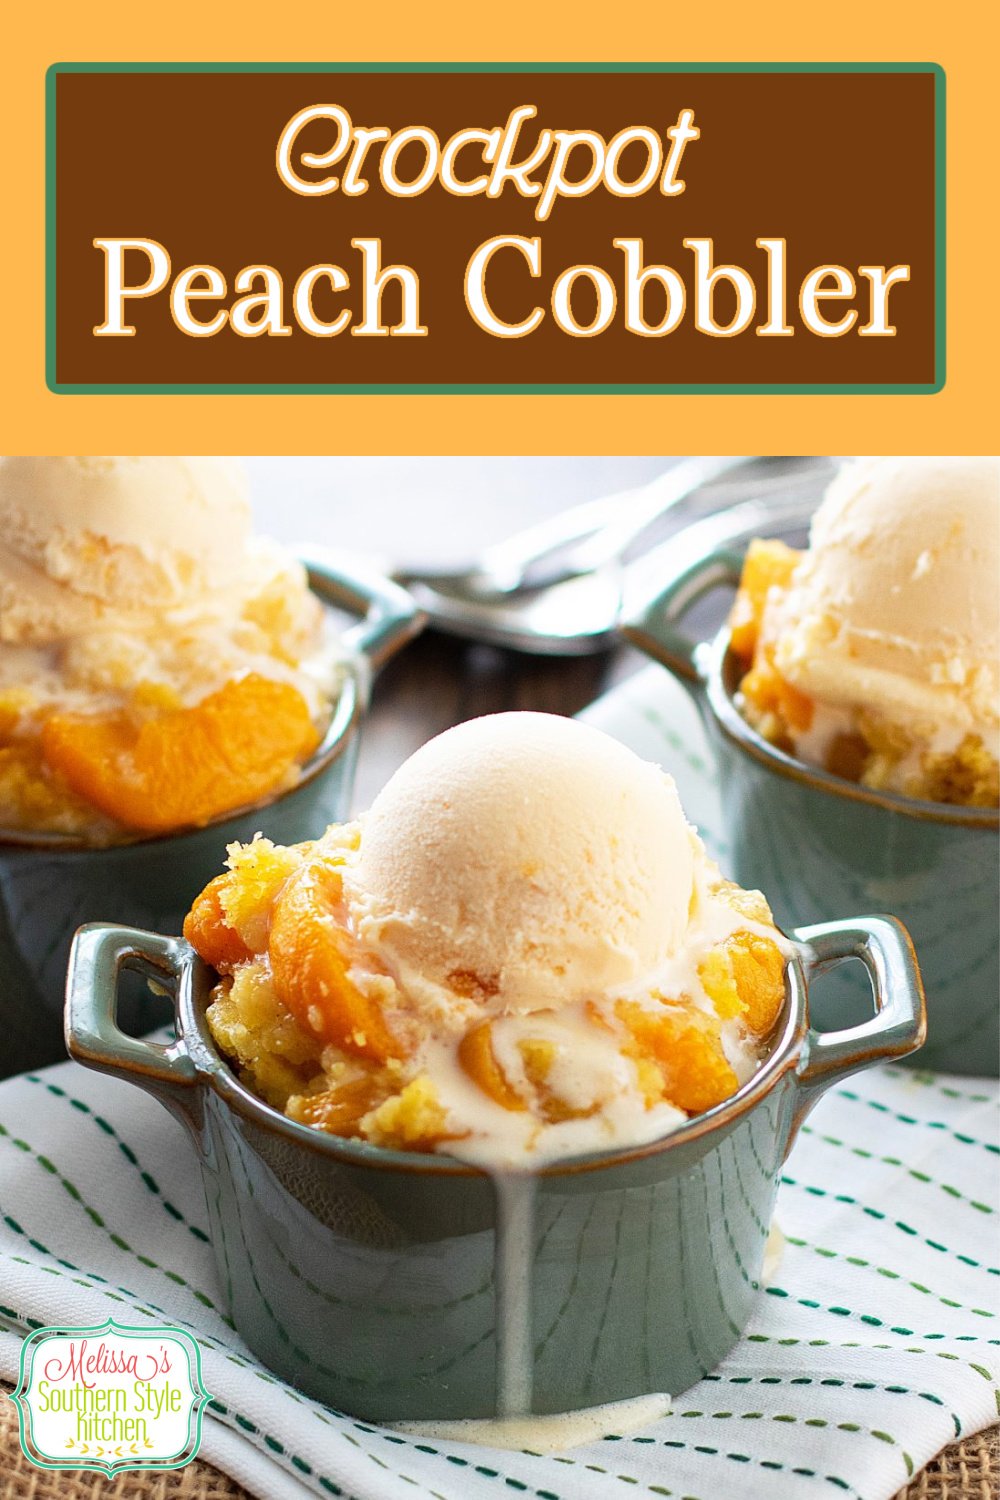 Enjoy a heaping helping of this Crockpot Peach Cobbler with a big scoop of vanilla ice cream for a warm and cozy dessert #peachcobbler #cobblerrecipes #peaches #peachdesserts #crockpotpeachcobbler #slowcookedpeachcobbler #crockpotrecipes #cakemixhack #desserts #dessertfoodrecipes #southernfood #southernrecipes